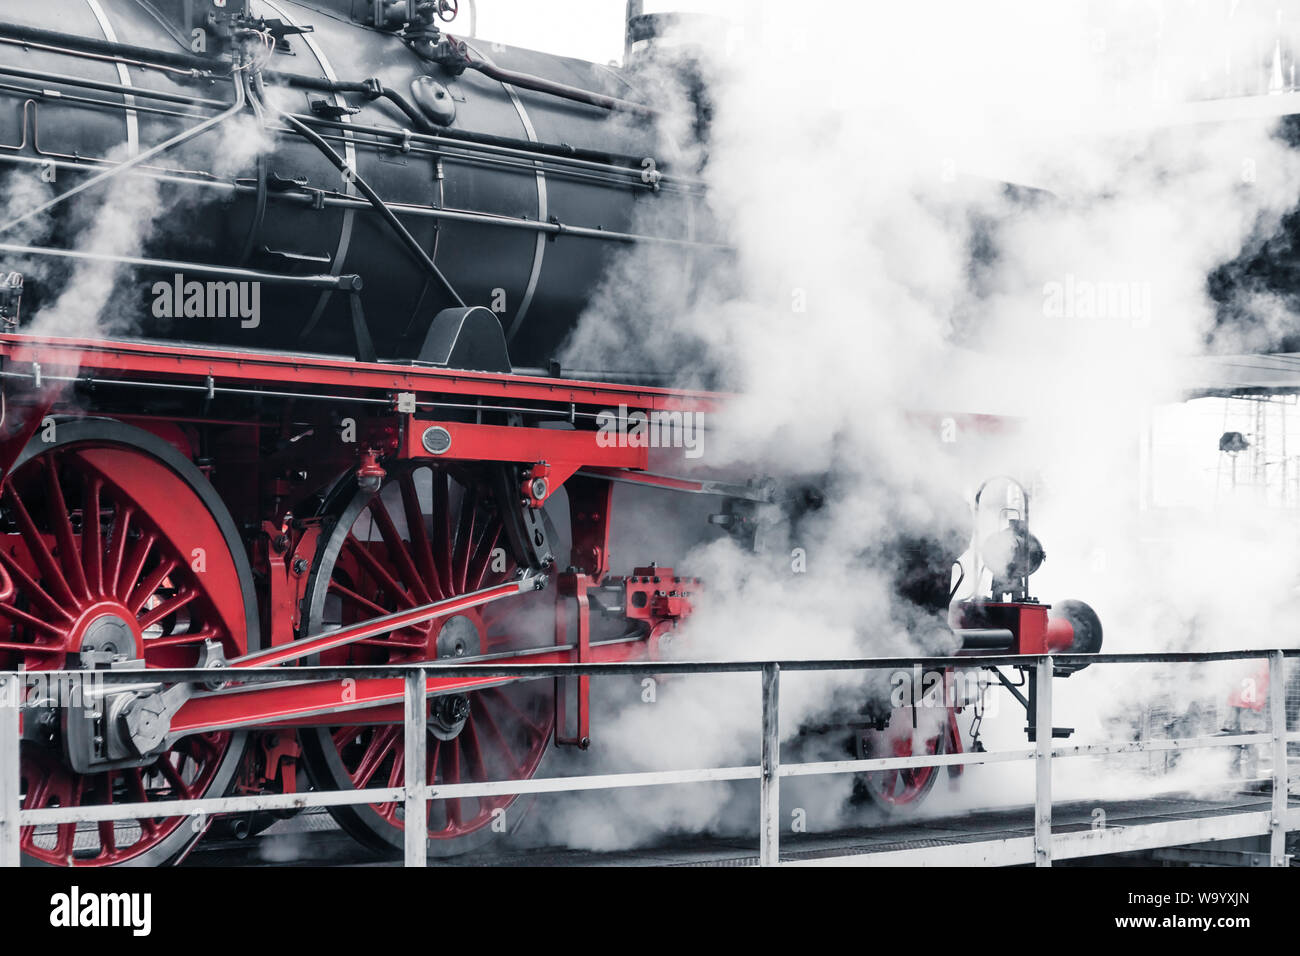 Old retro steam locomotive in a depot Stock Photo